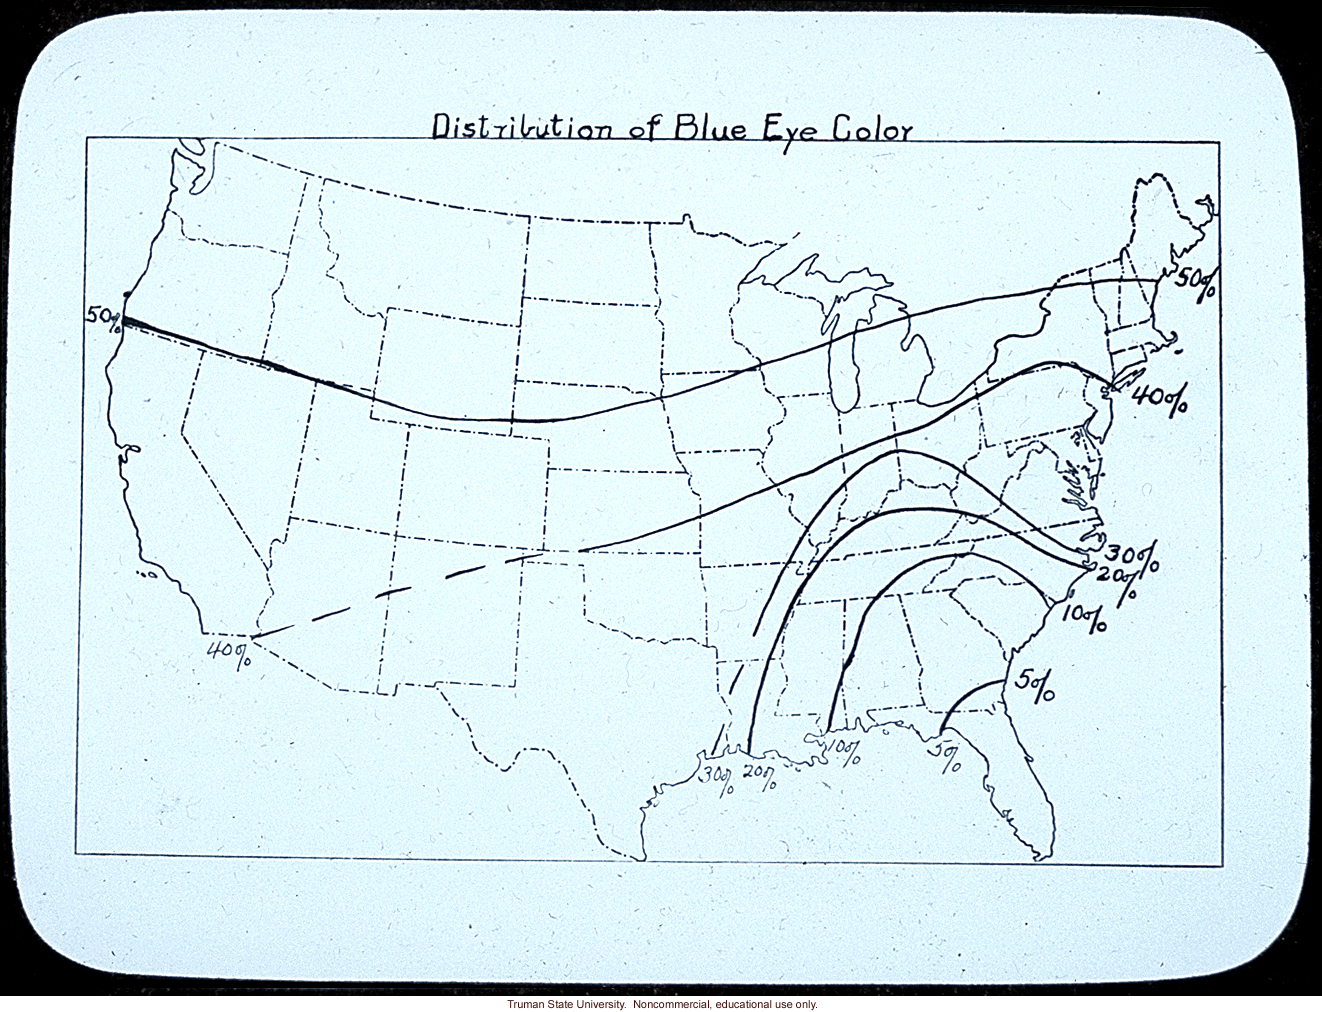 &quote;Distribution of blue eye color&quote; in the United States